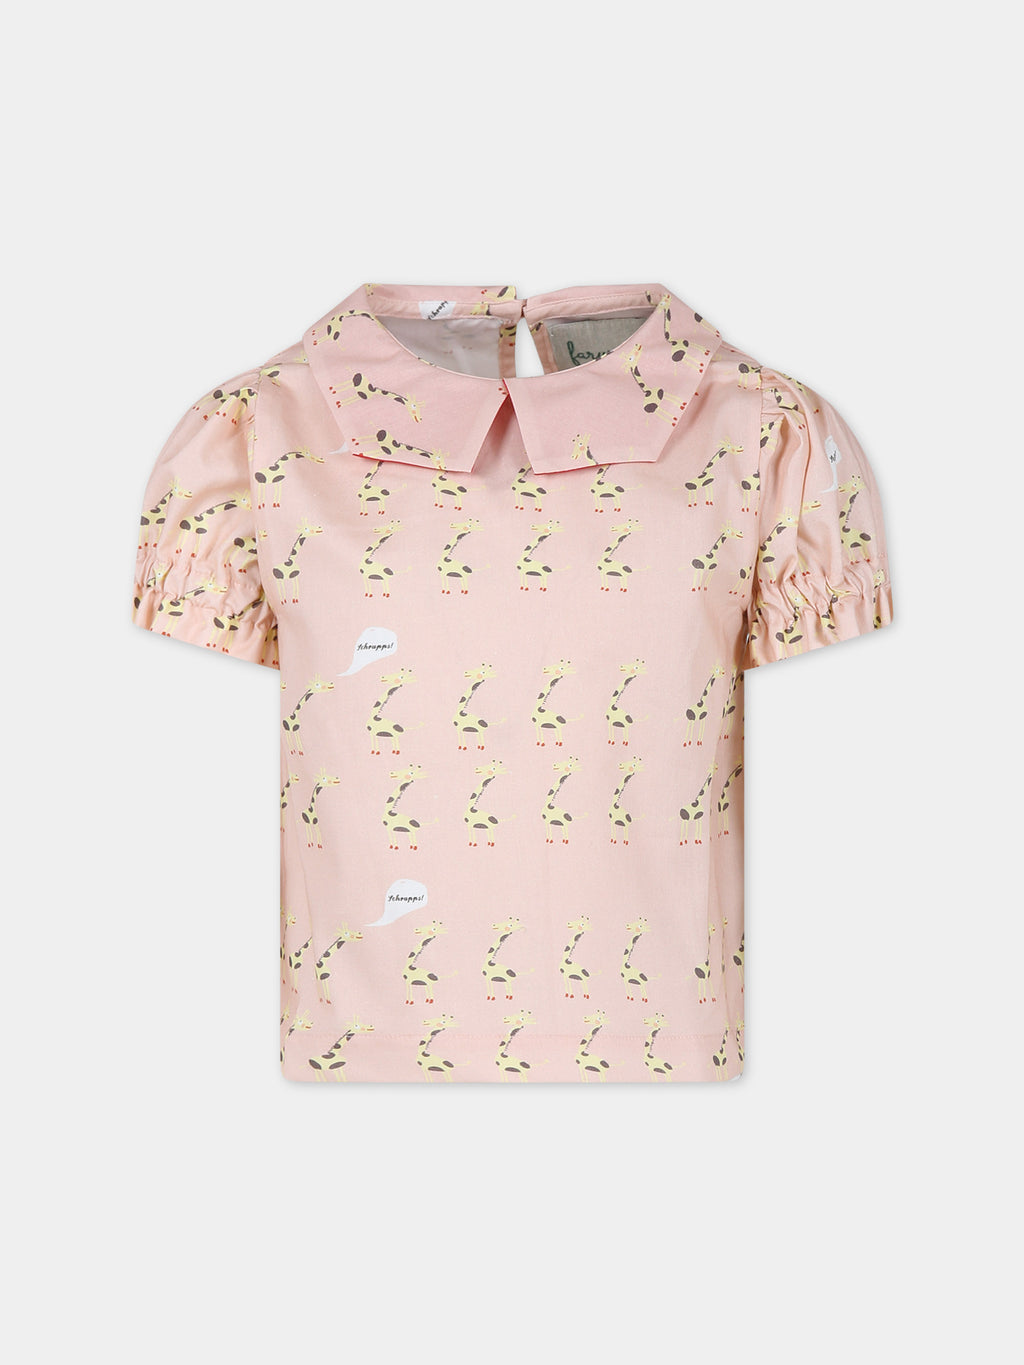 Pink shirt for girl with giraffes